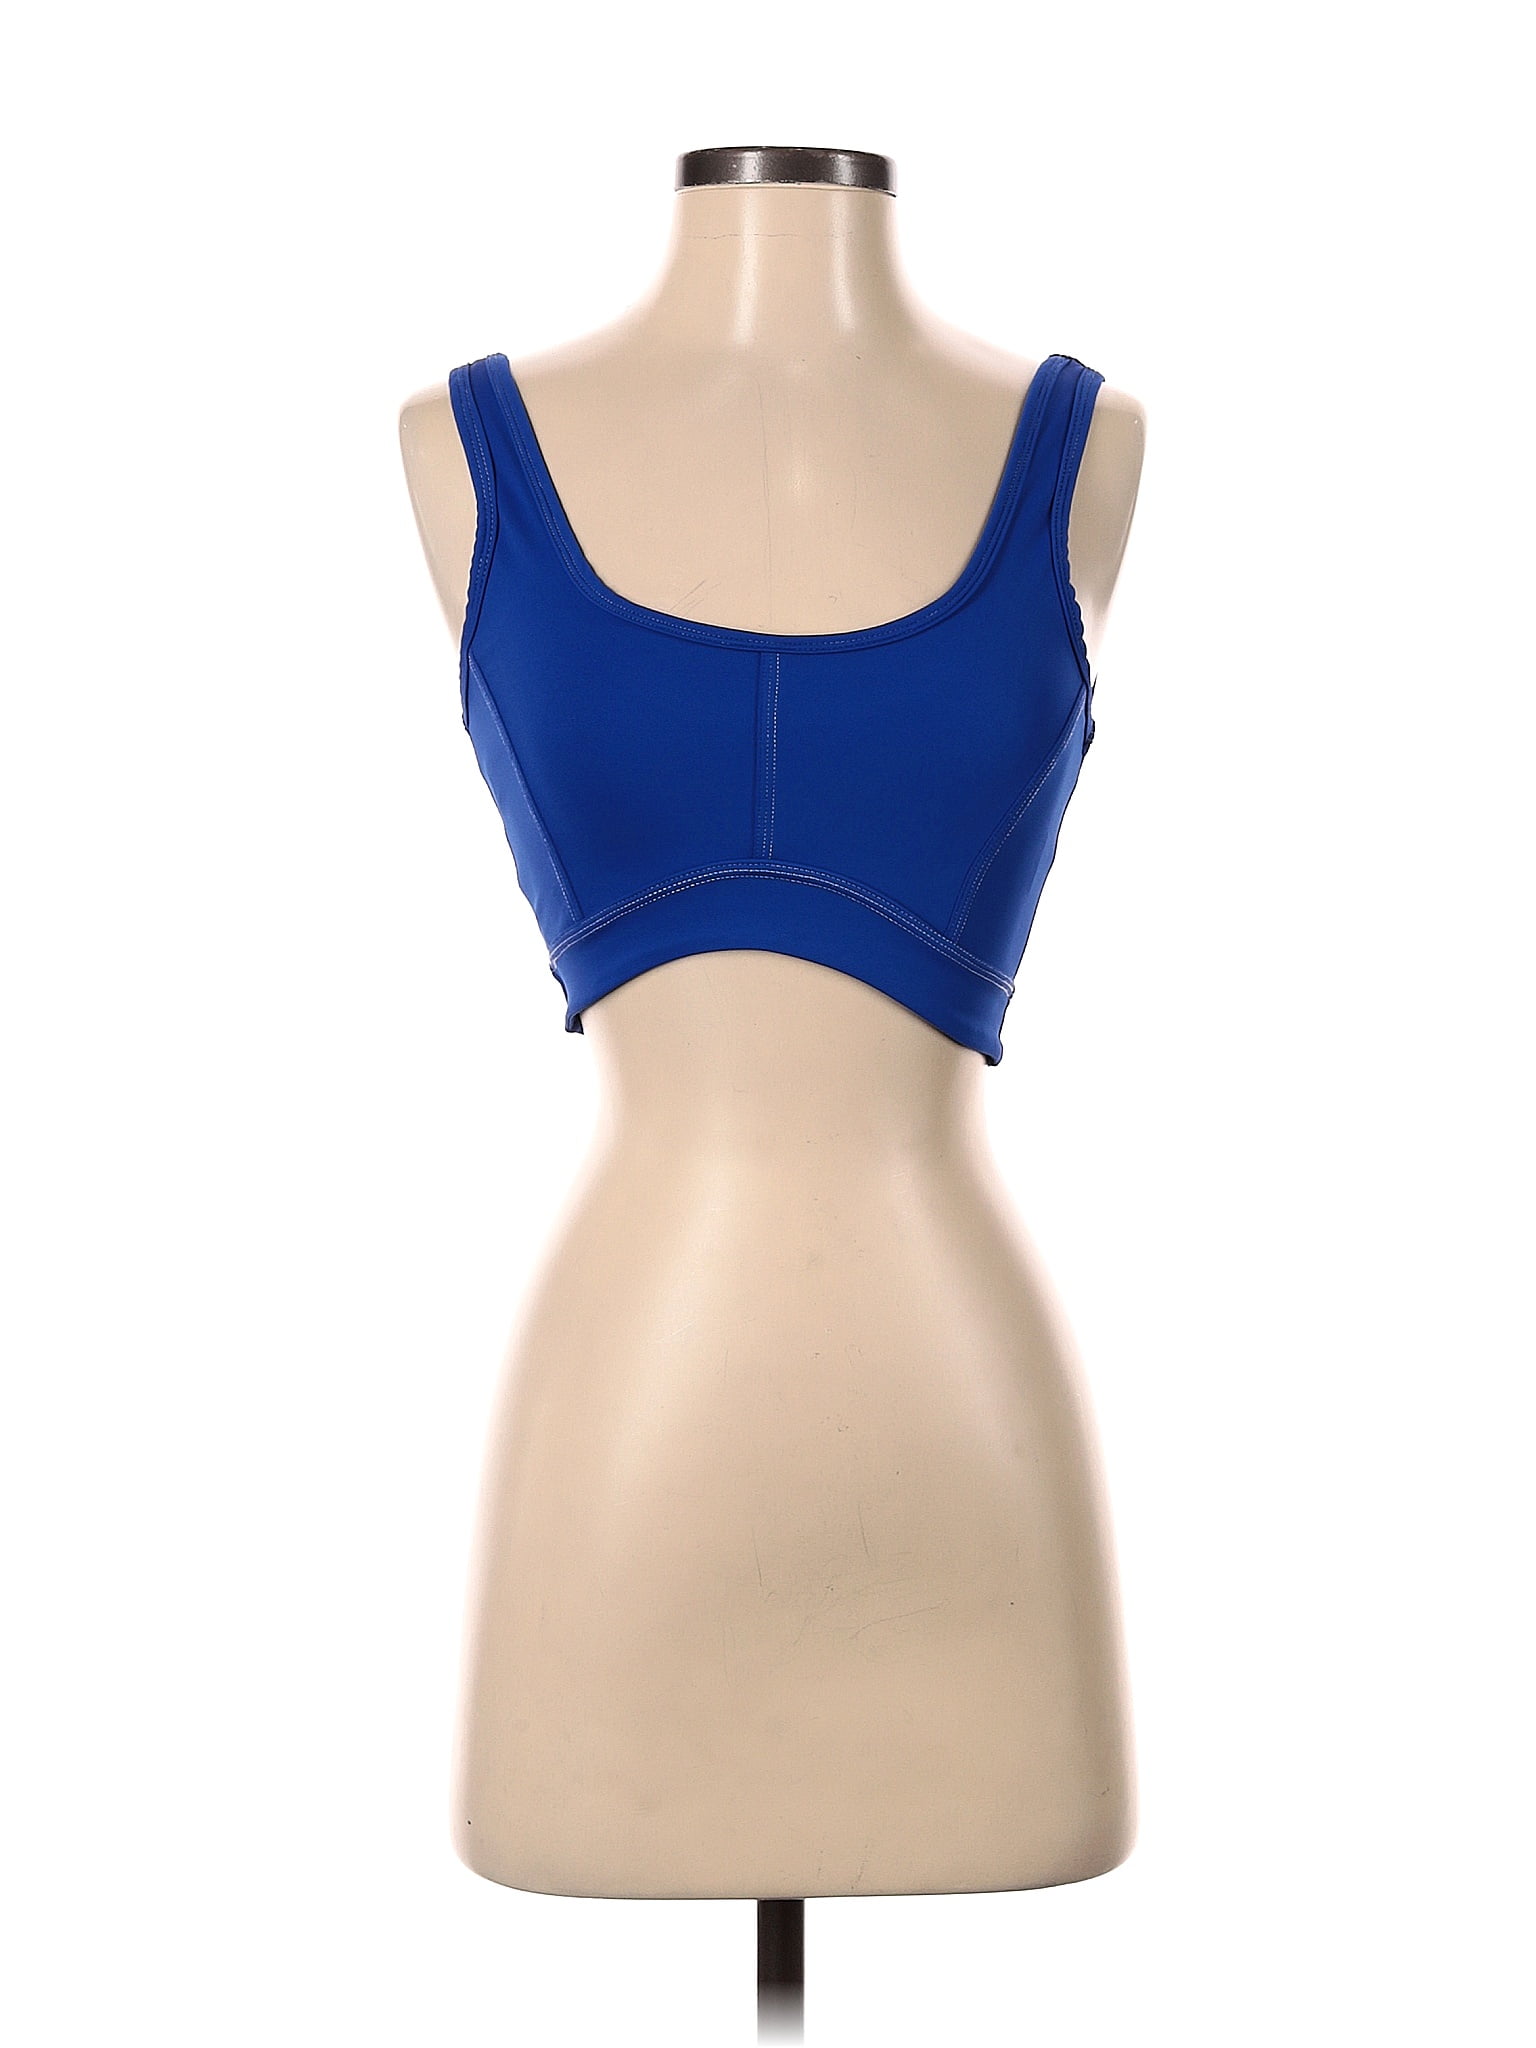 Wilo Sports Bra Blue Size XS - $28 (41% Off Retail) New With Tags